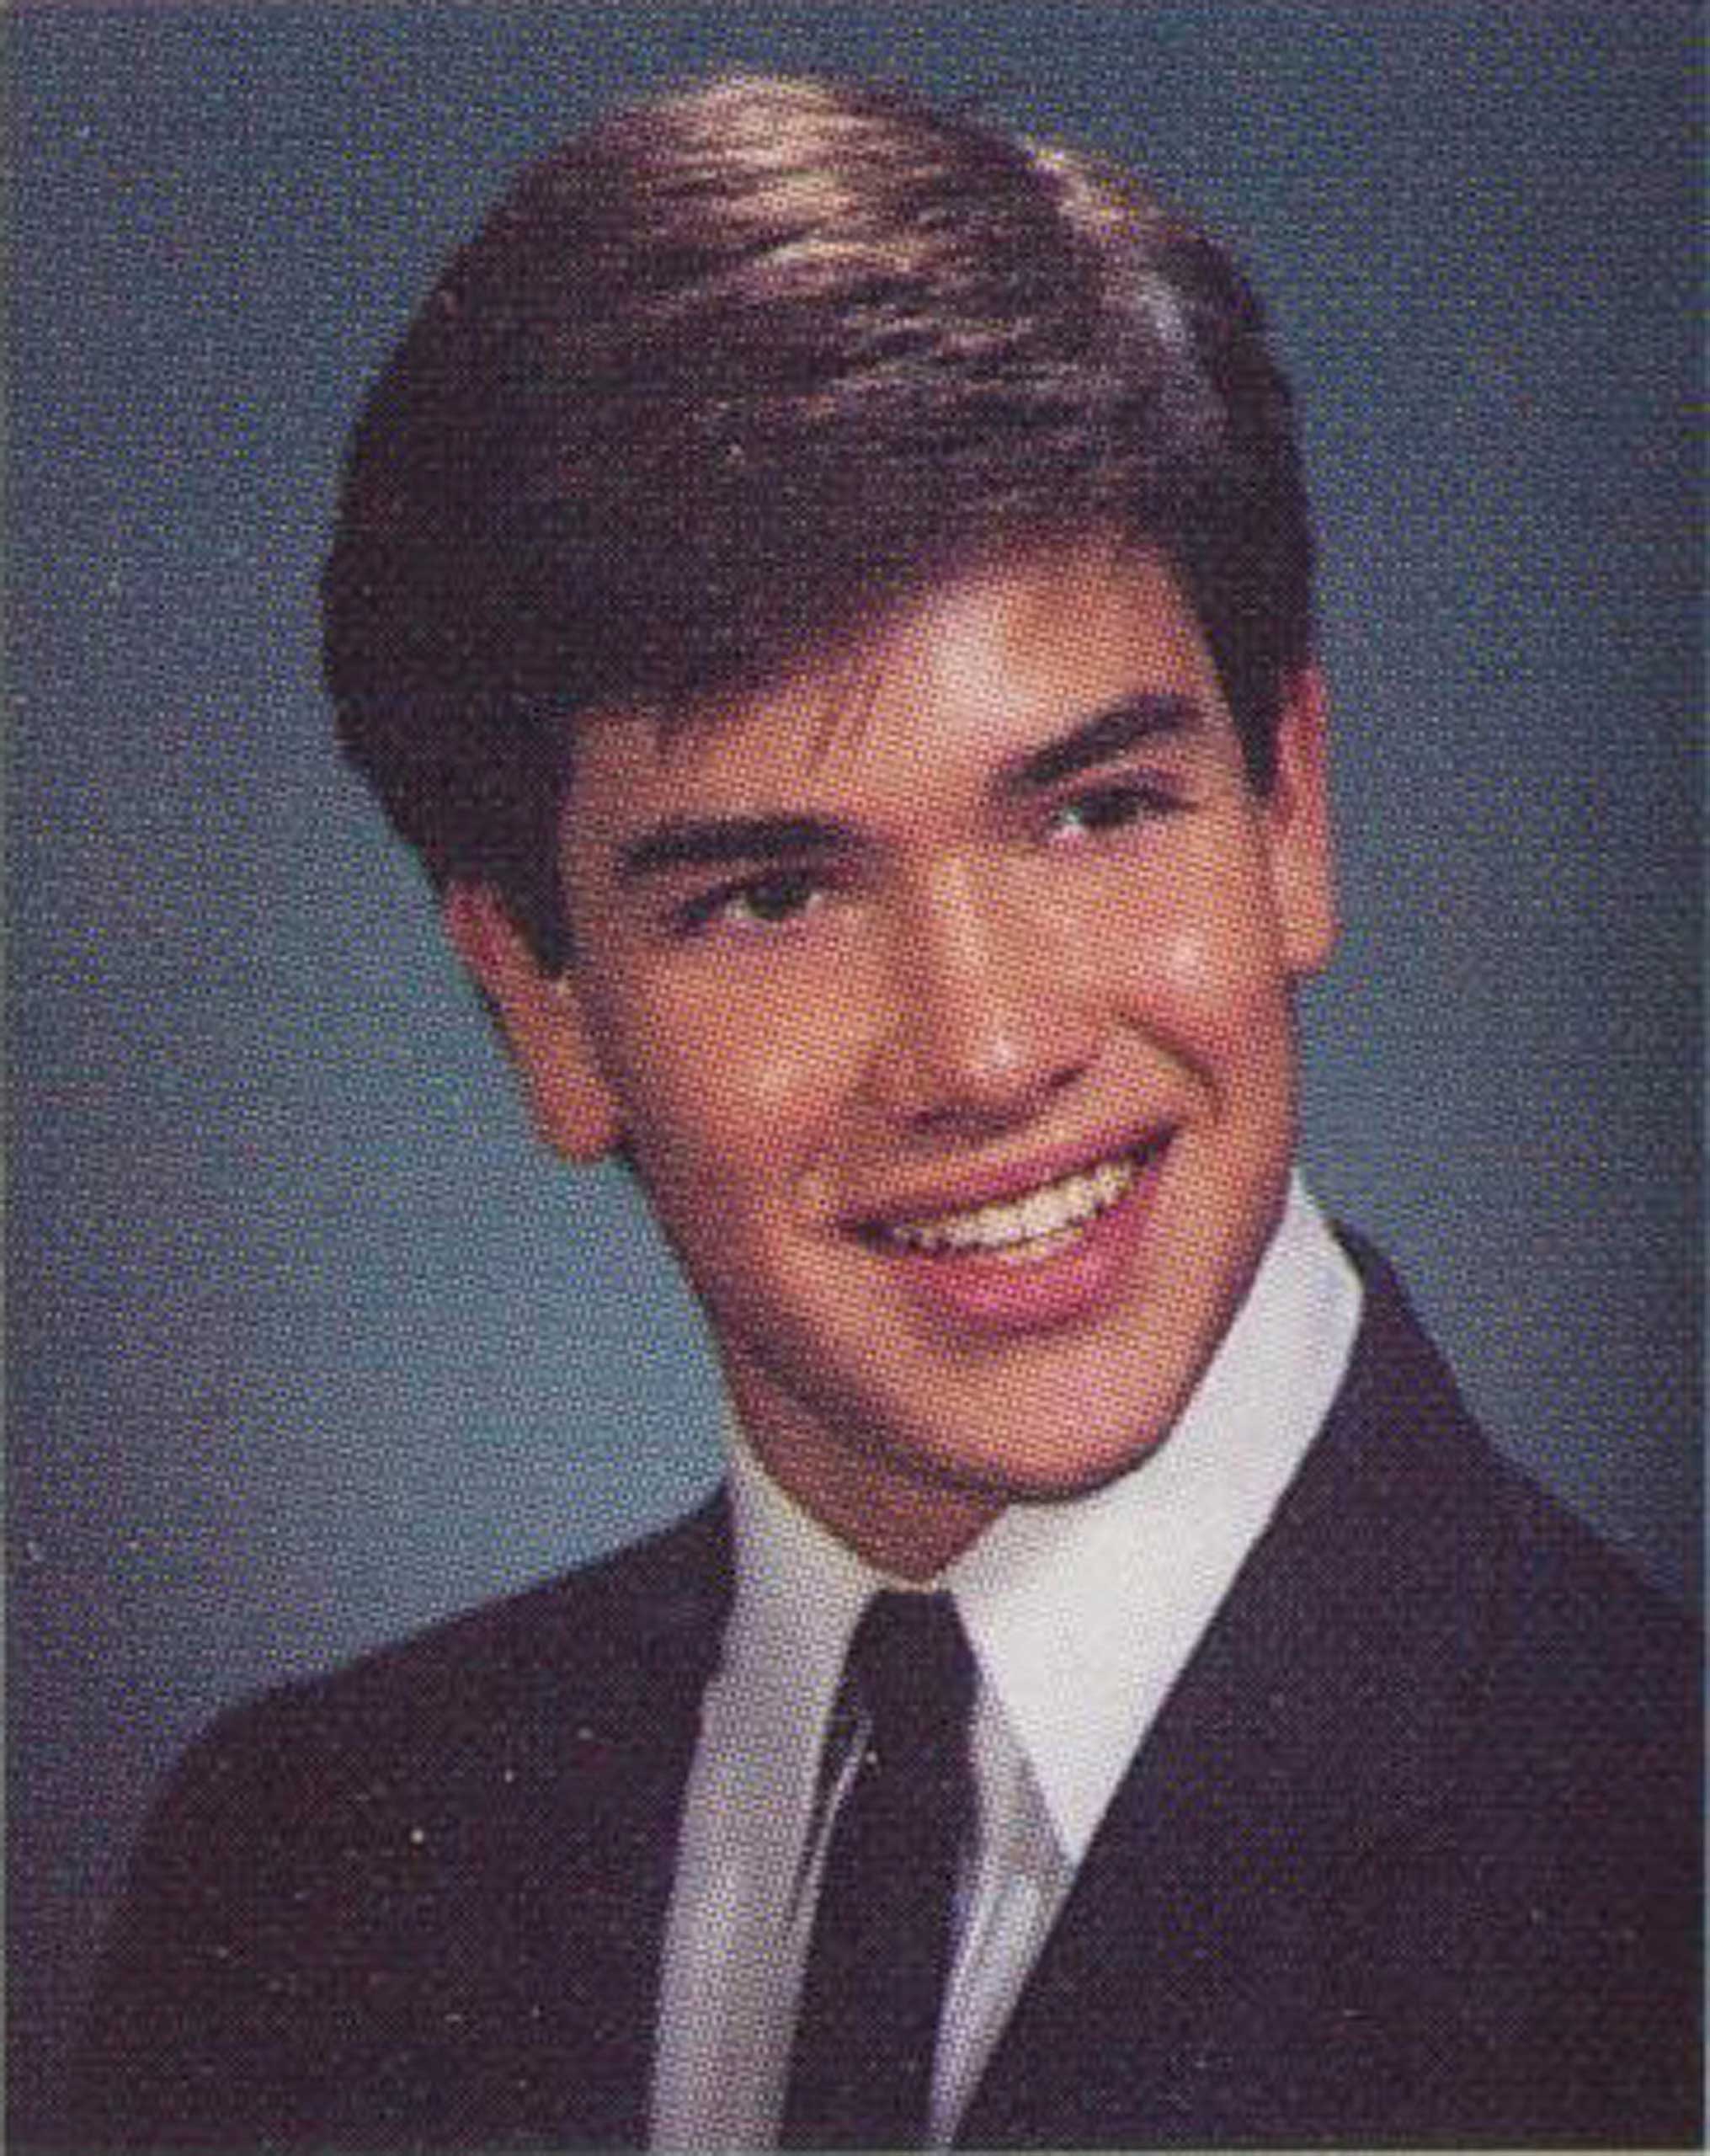 High school photograph of Marco Rubio from his 1989 yearbook.